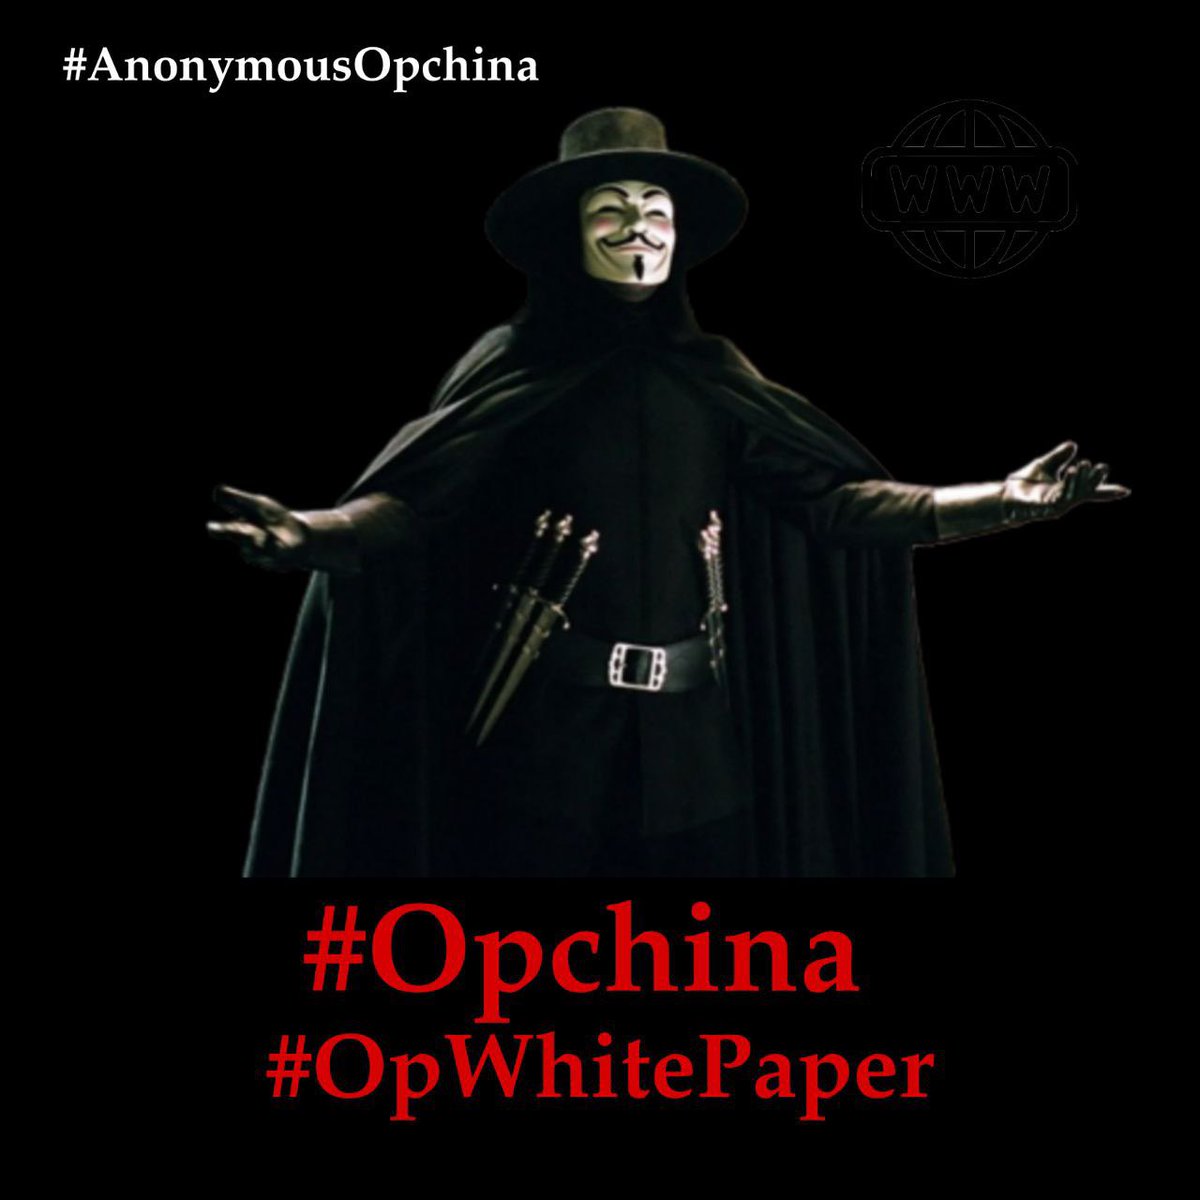 Anonymous starts attacking Chinese websites and cameras again!
#Opchina #OpWhitePaper 
---
Anonymous又开始攻击中文网站和摄像头了！

Expect Us!